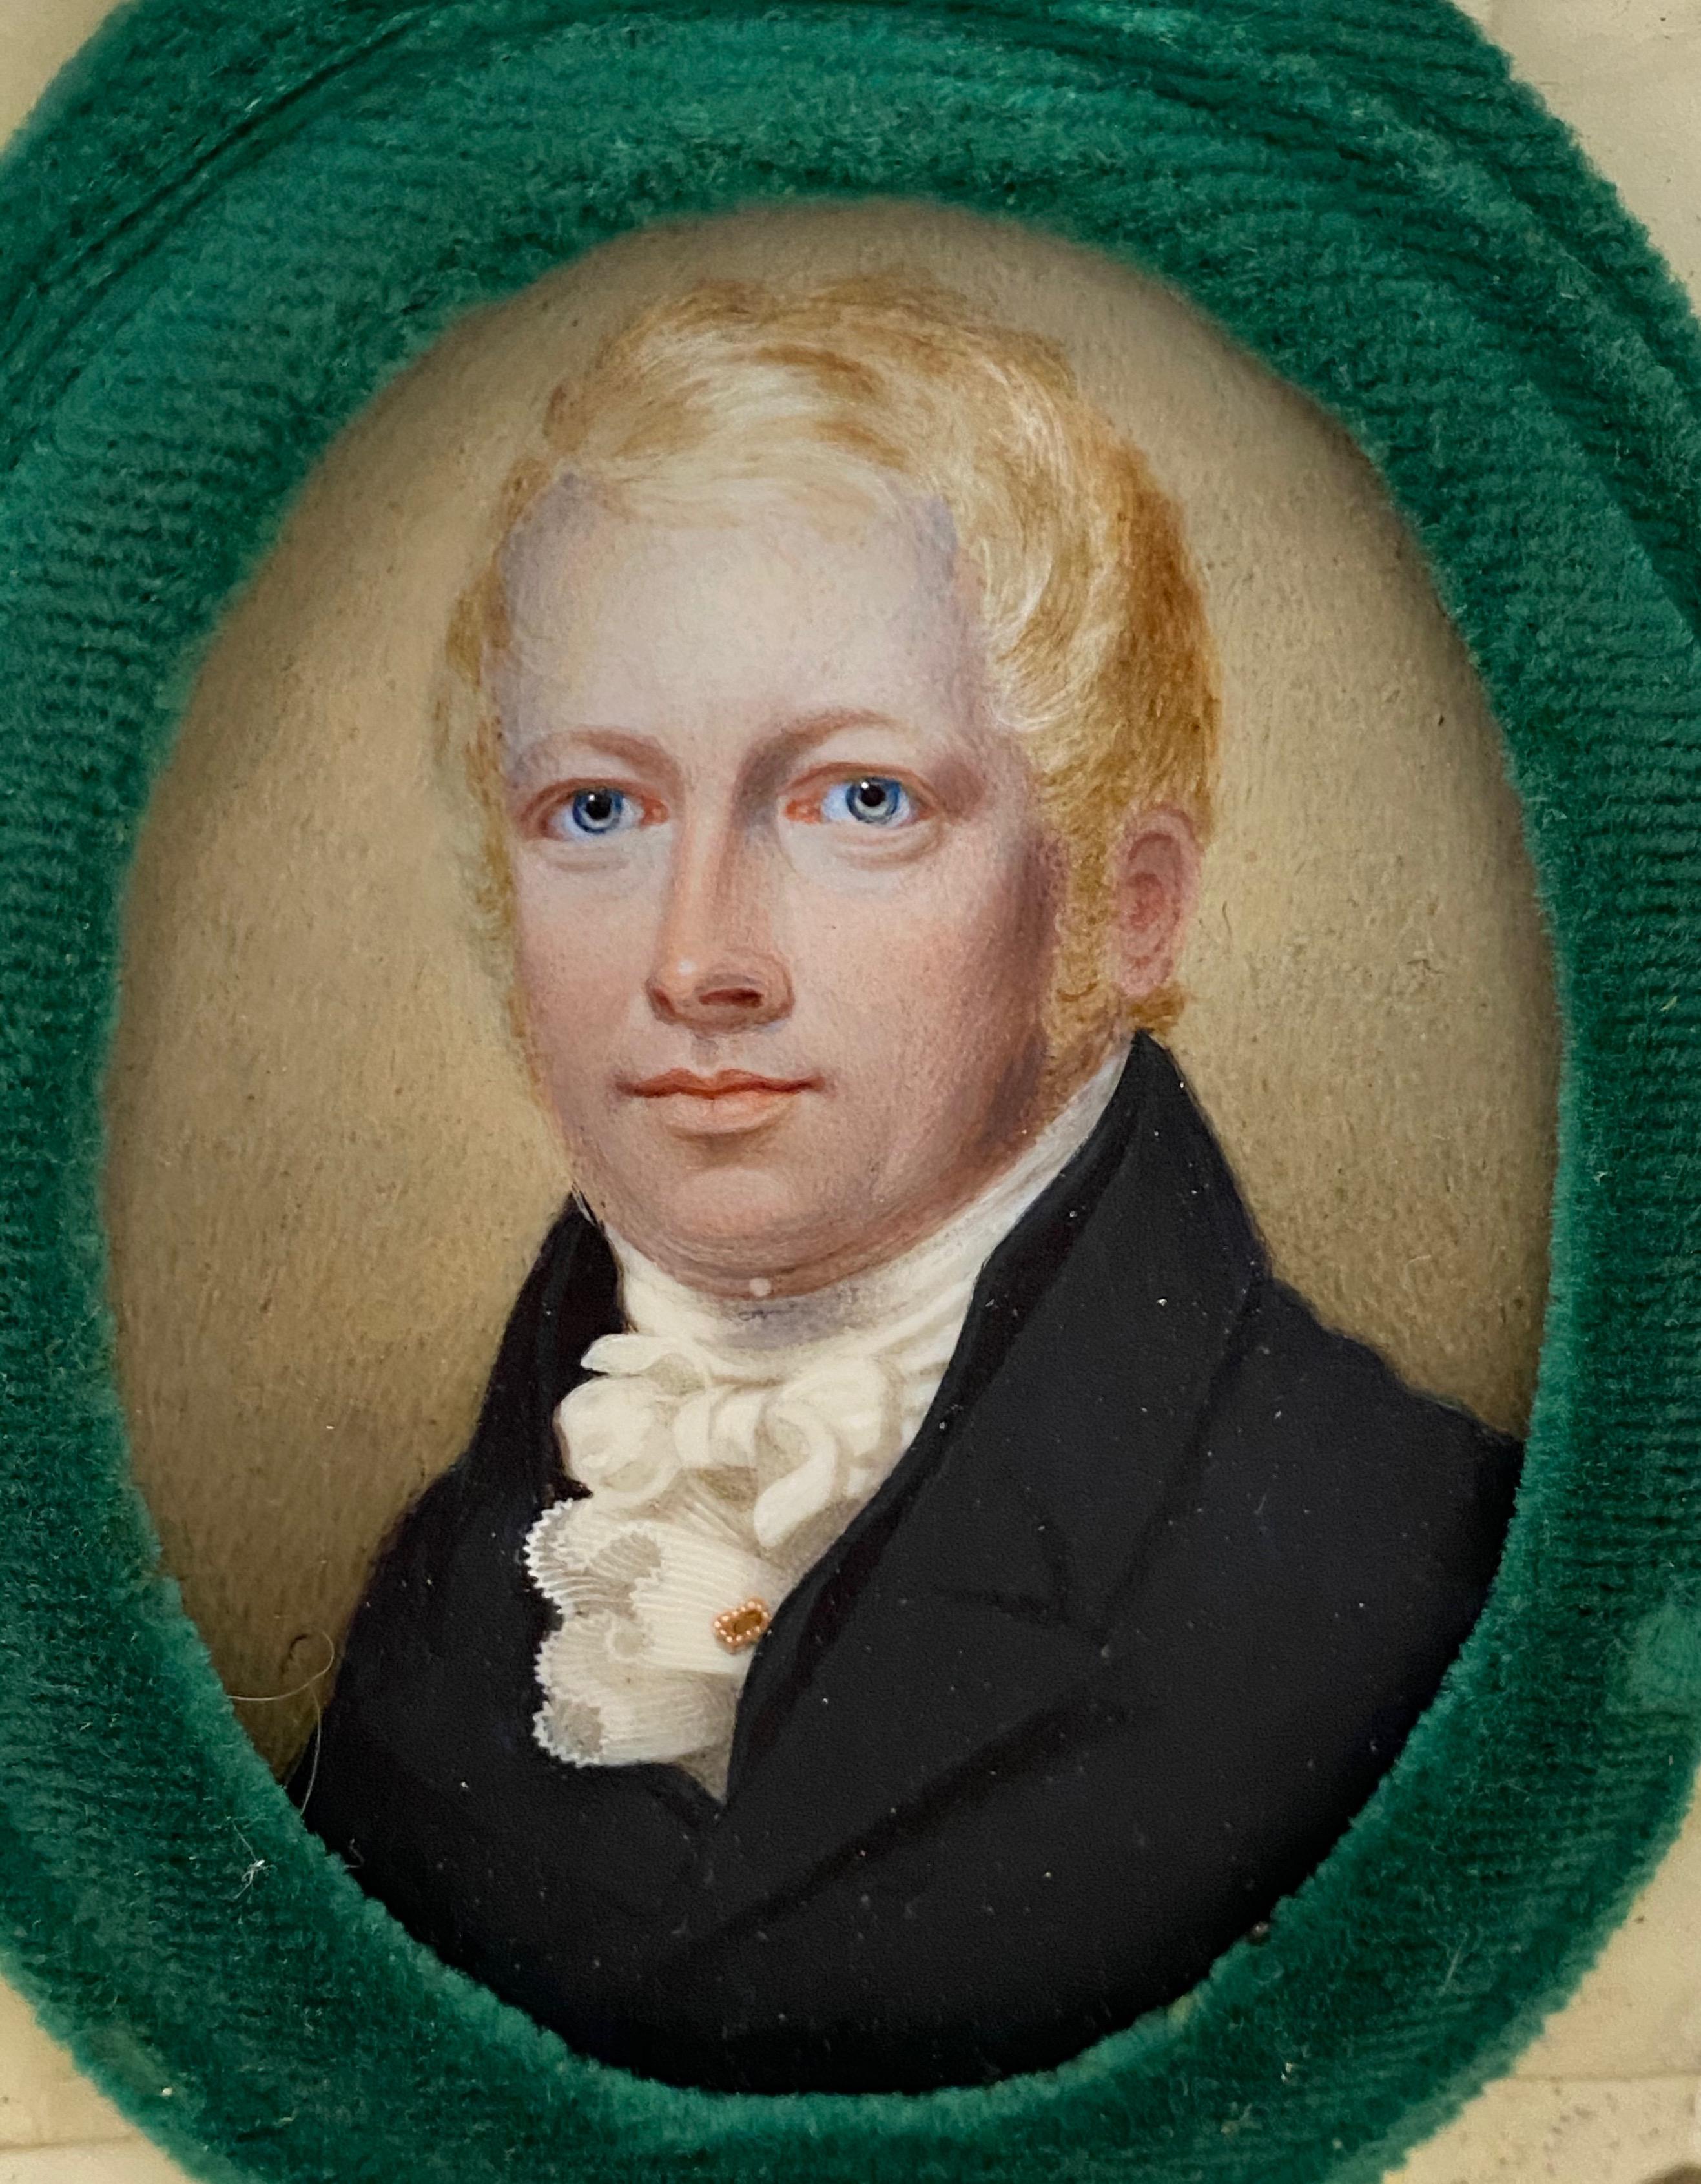 19th century portrait miniature of a young man with blonde hair and blue eyes.

Handsome young man with blonde hair and blue eyes.

The miniature sits loosely in the frame. The frame is included as added support only.

Portrait dimensions 2